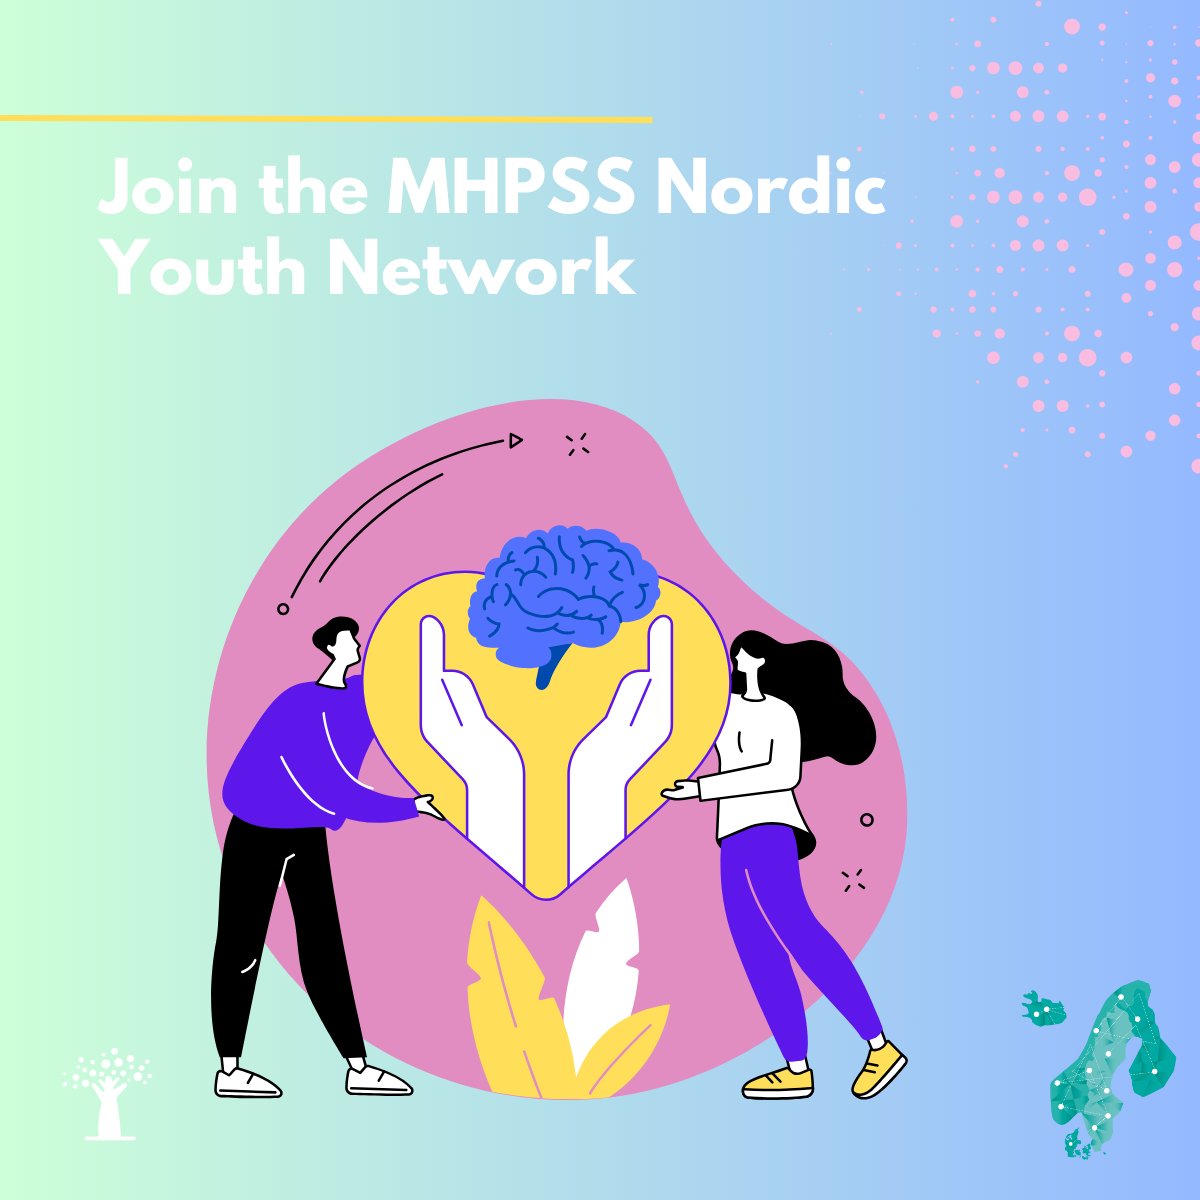 🚀 Join the Nordic #MHPSS #Youth Network. Invited are entities from Nordic countries, especially those with youth in humanitarian settings, refugee/migrant youth, academic institutions & affected communities. 🔗 Join Here - forms.office.com/e/aVmZib3E17 #YouthMHPSS #NordicNetwork